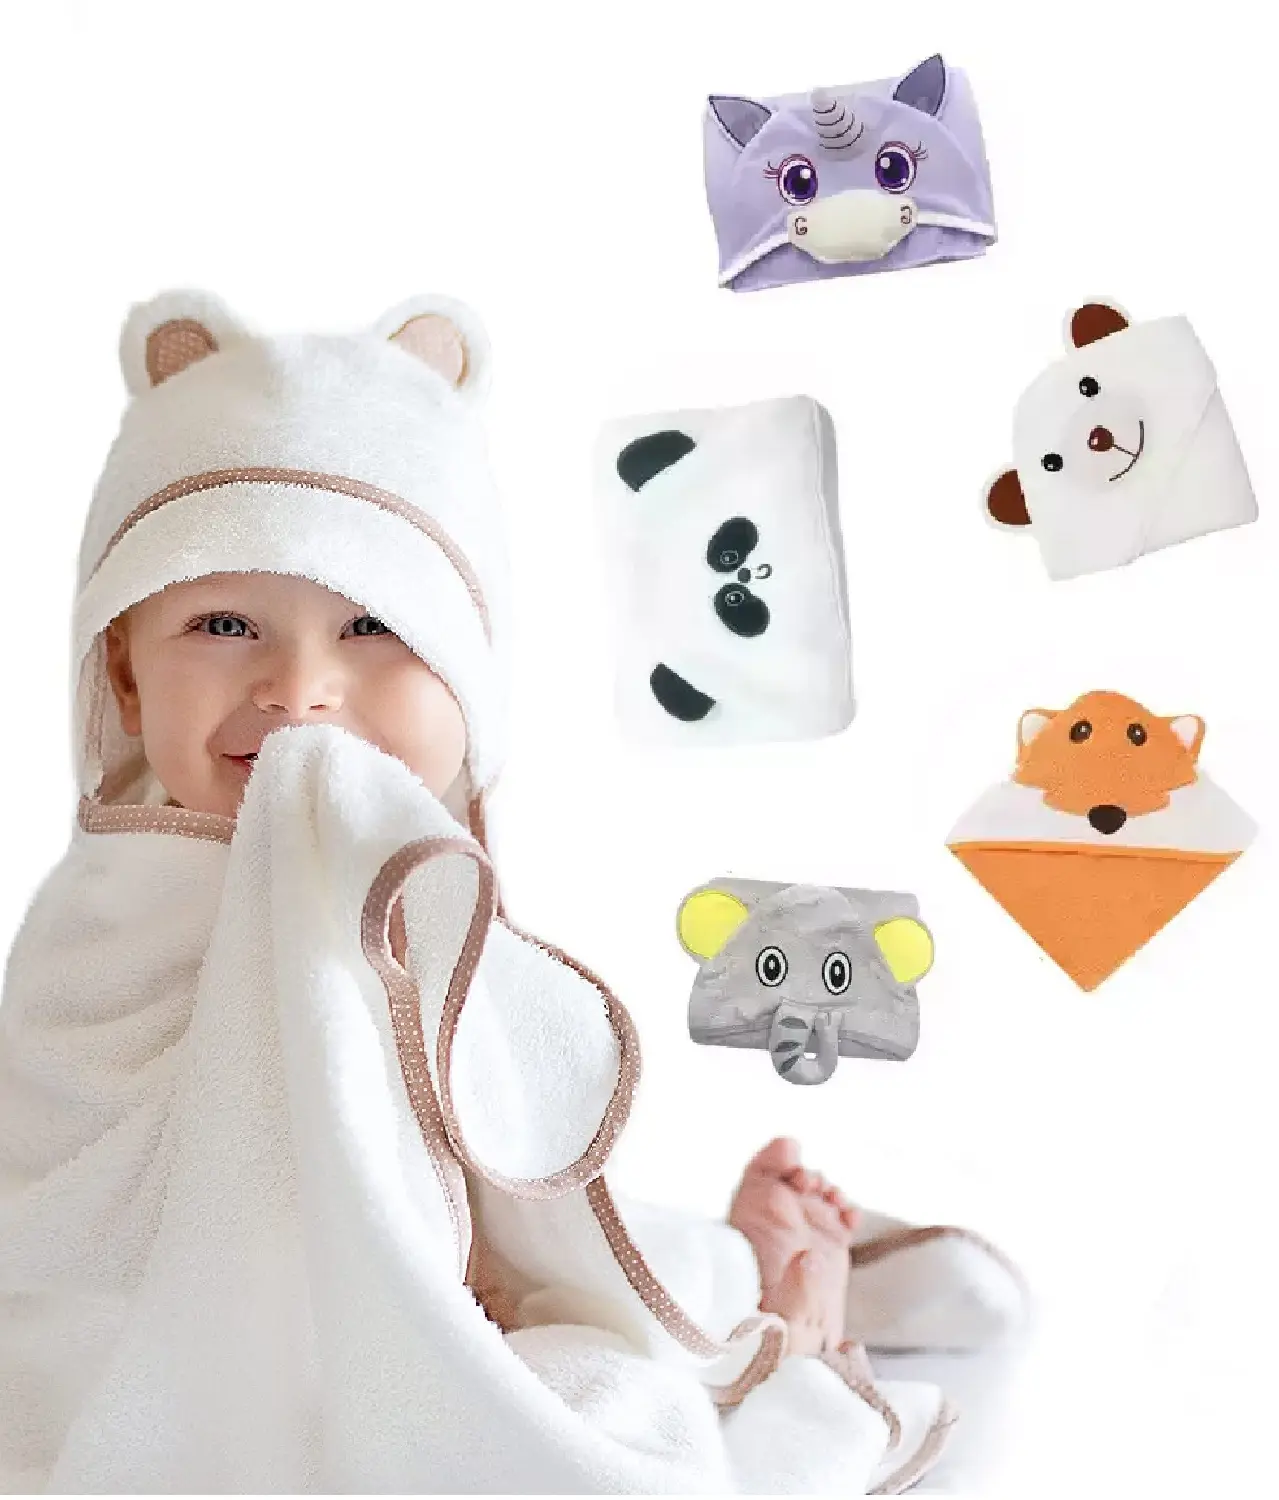 Factory Direct Wholesale Animal Design Super Breathable Soft Cartoon Kids Bath Towel 100% Bamboo Baby Hooded Towel